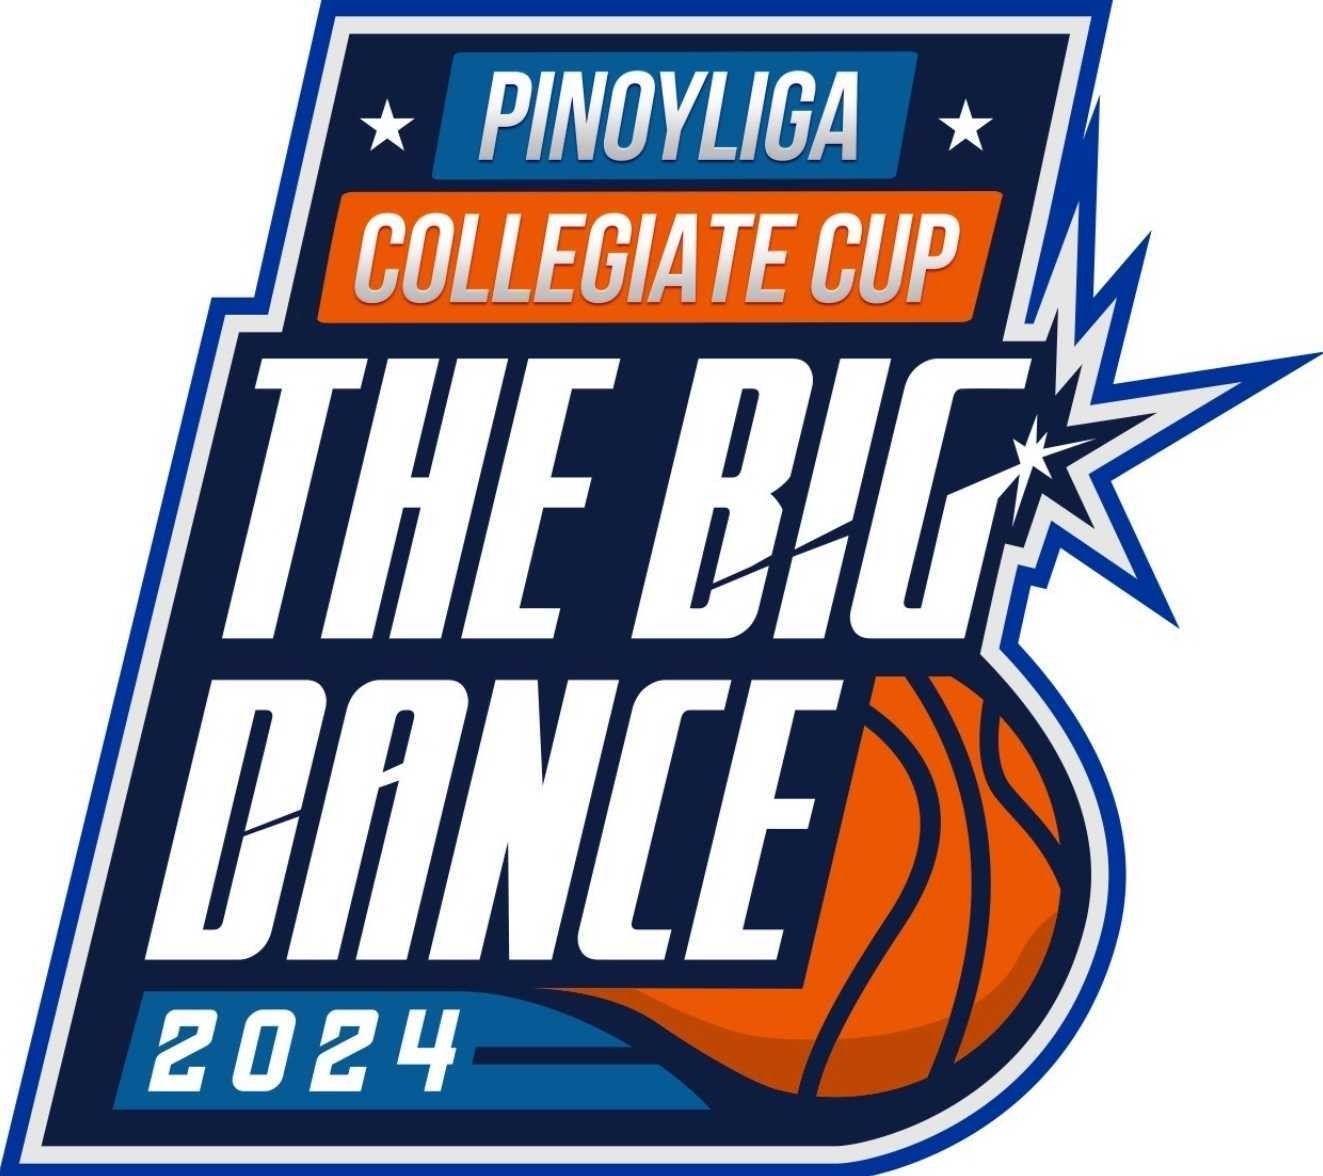 US March Madness-style tourney comes to Philippines with 'Big Dance'